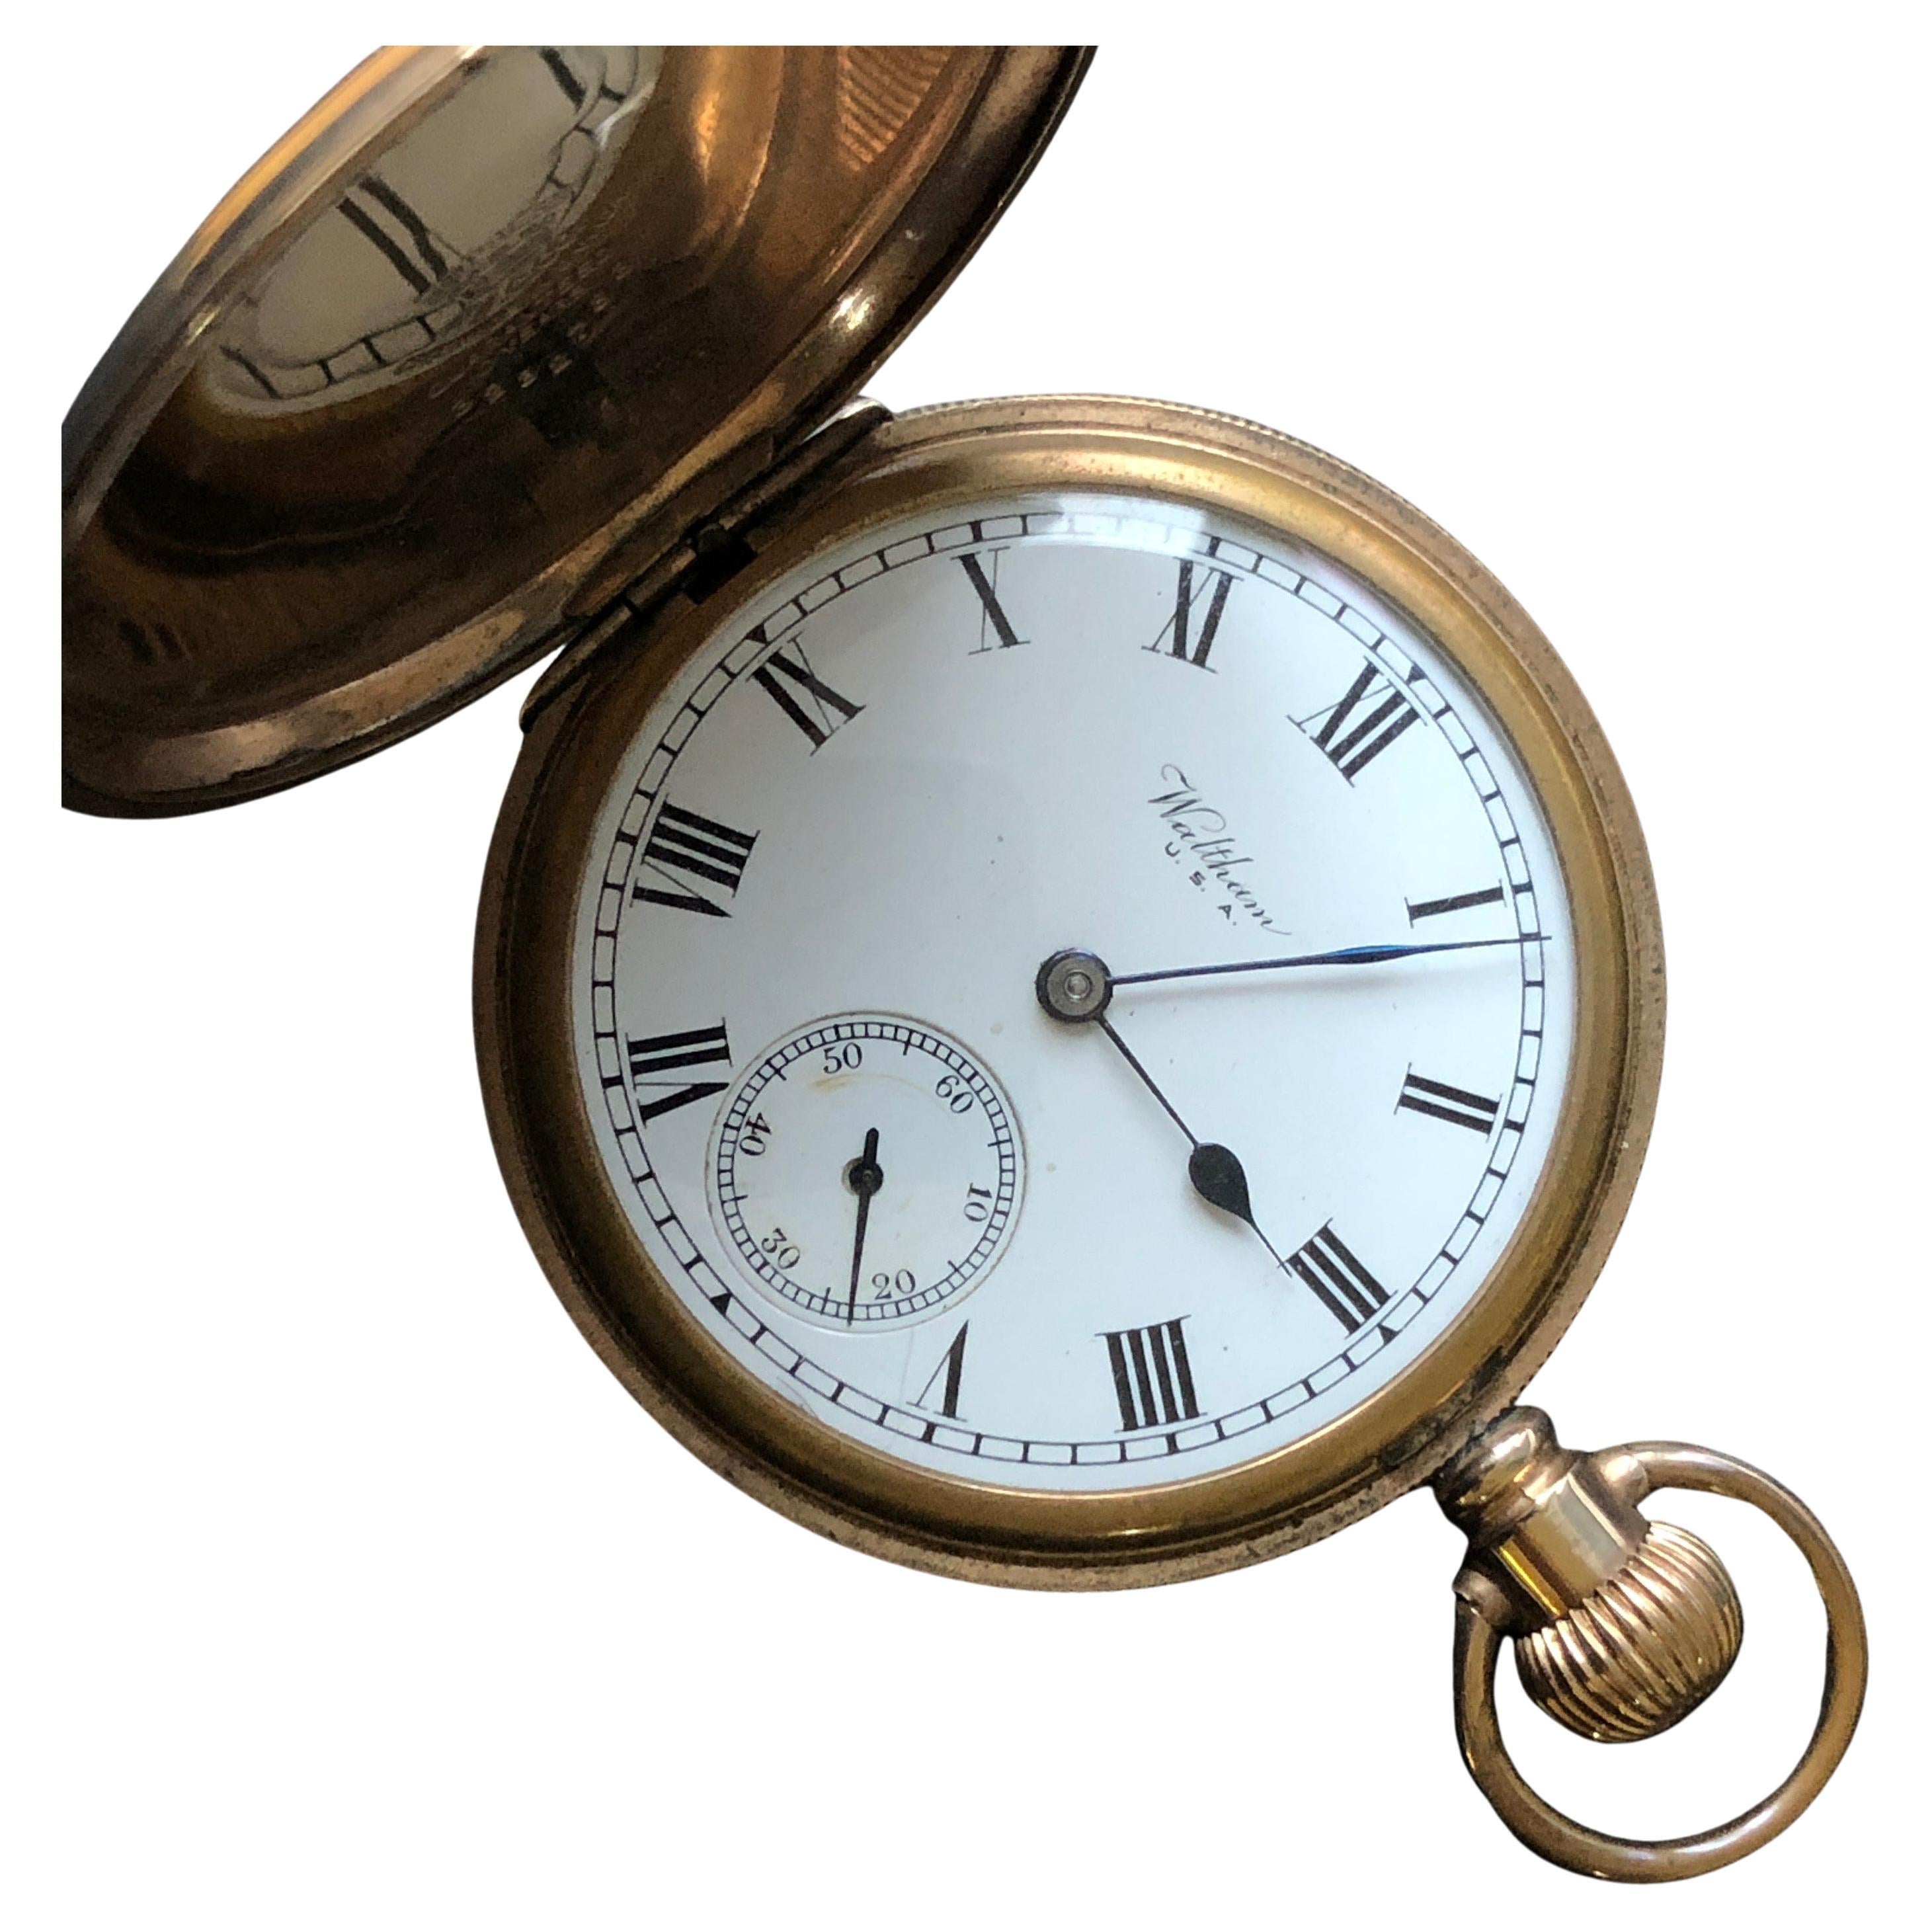 Waltham Traveler gold filled Hunter (Sidewinder) pocket watch
Movement serial number 23288353 dates 1919 as estimated Production Year.
Size 16 with 7 jewels movement
The dial is in perfect condition with blue steel Spade Style hands.
Crystal is free